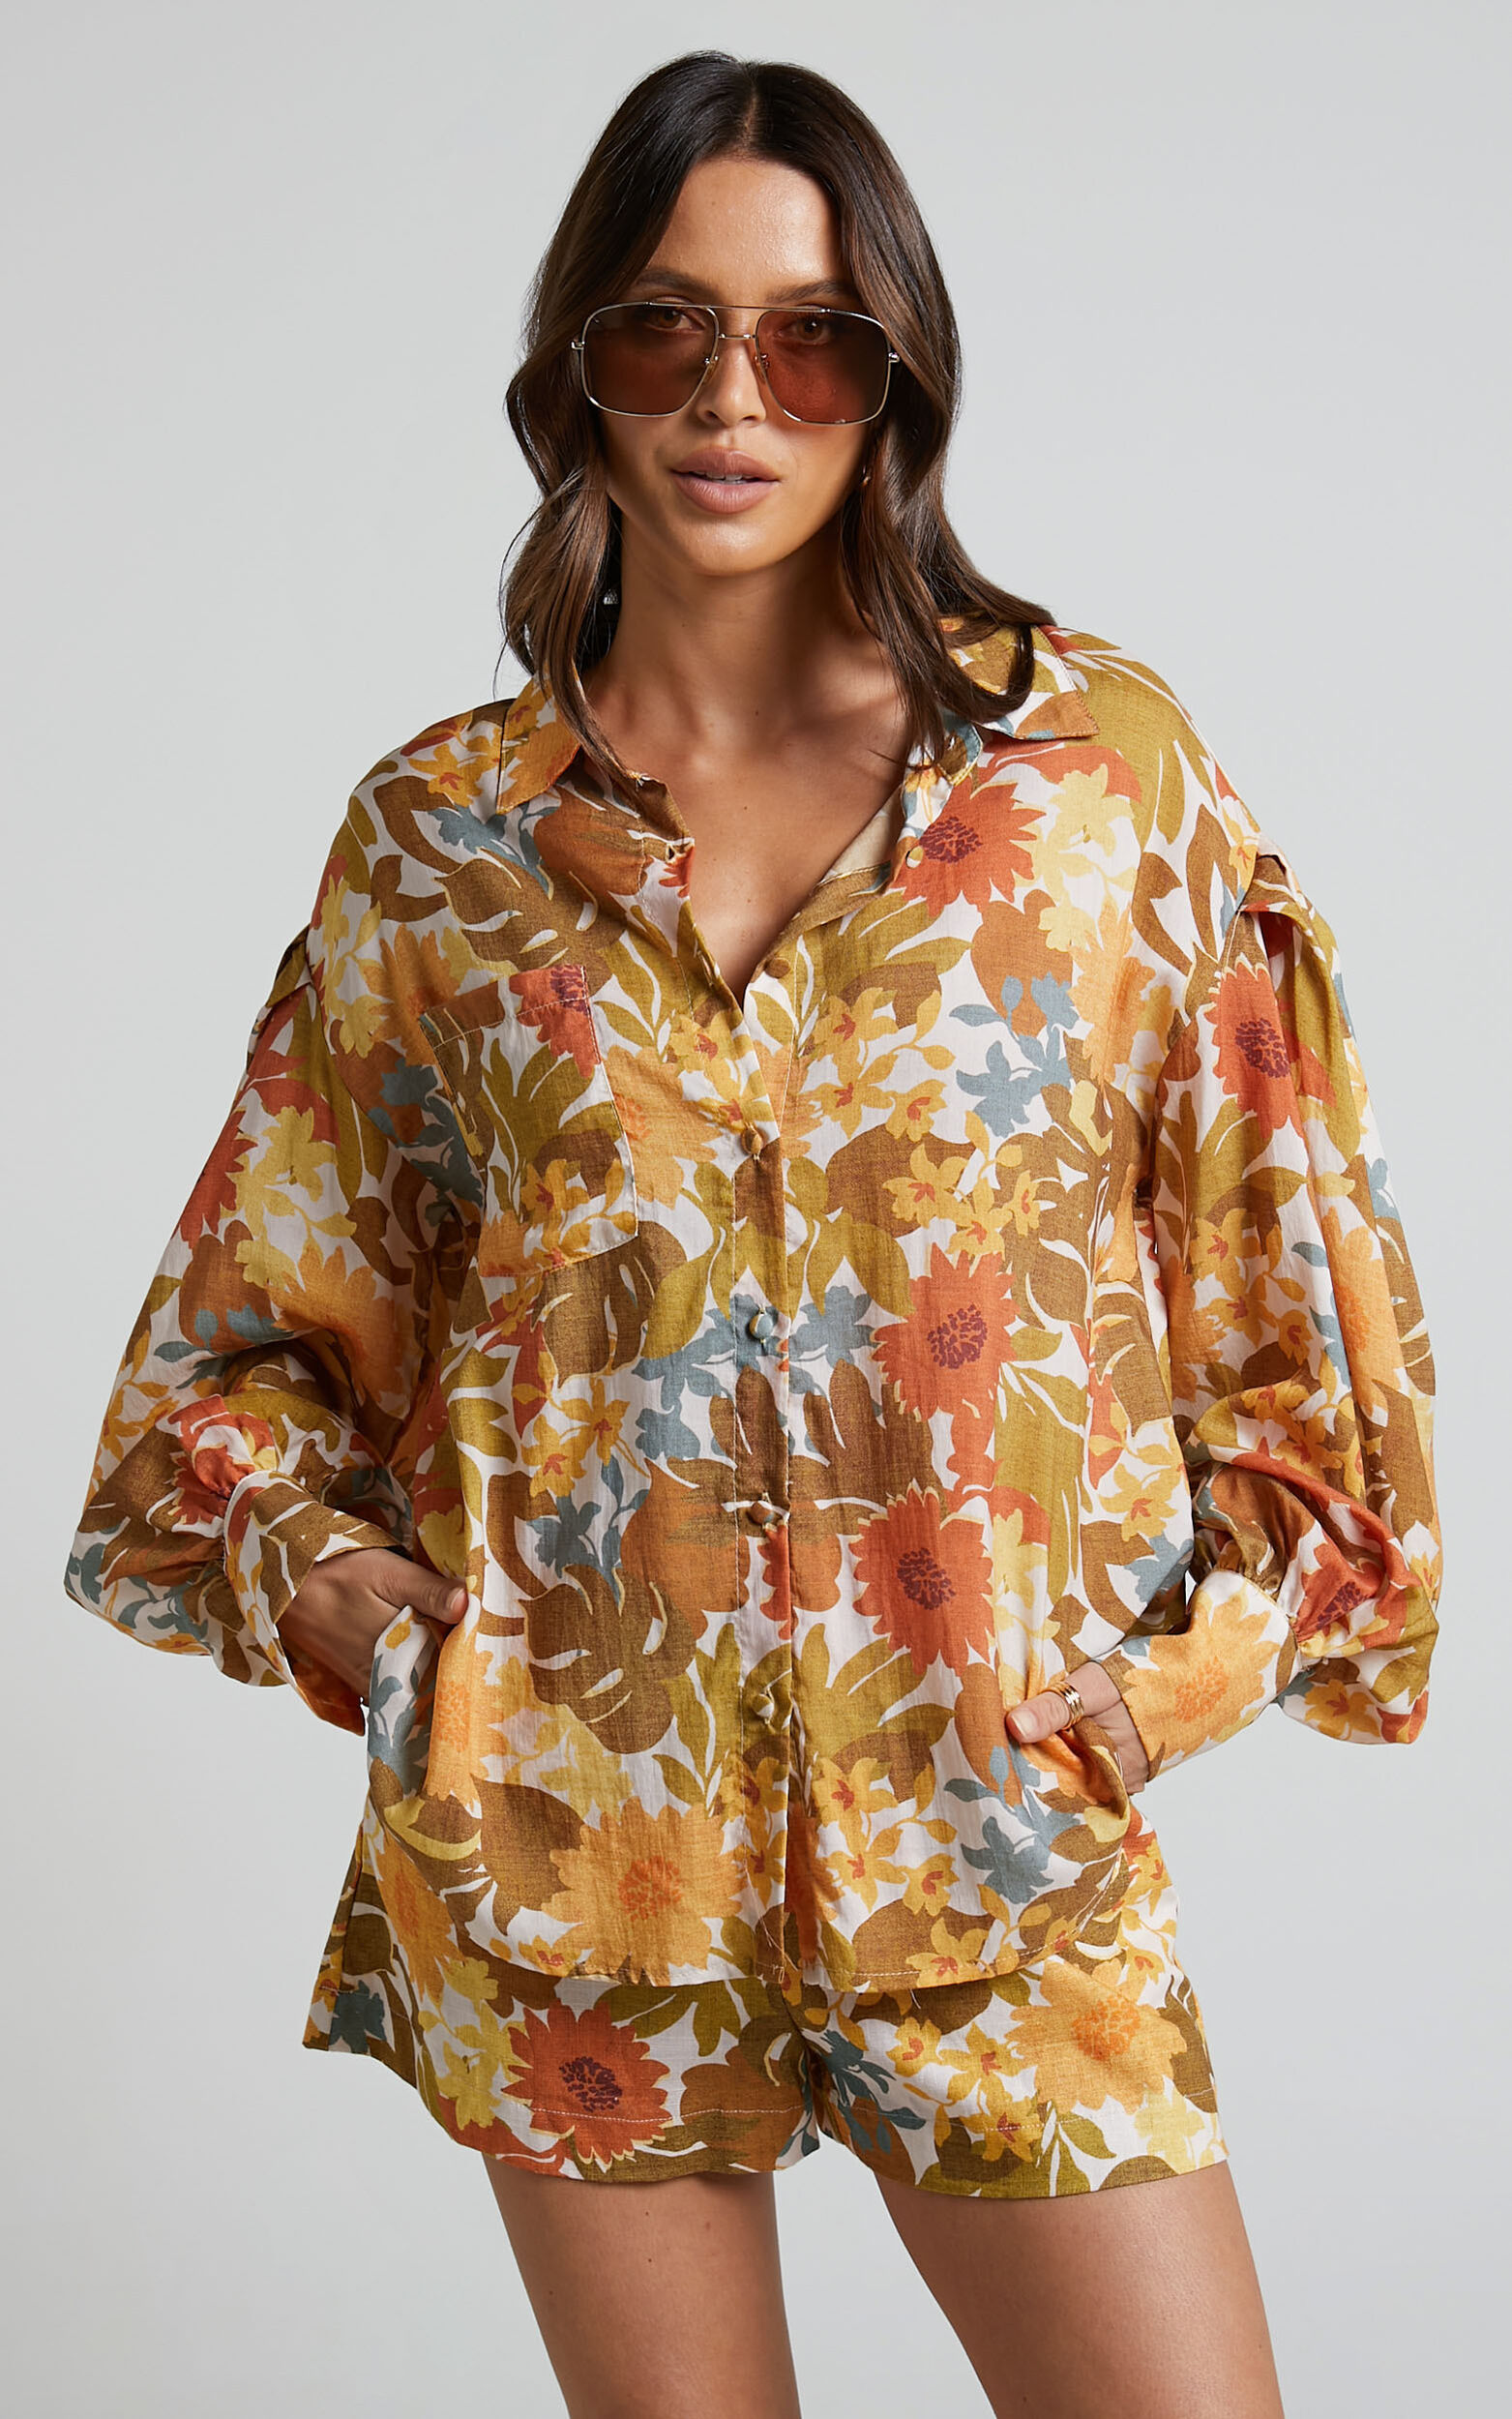 Amalie The Label - Azariah Balloon Sleeve Button Up Shirt in Emerson Floral - 04, ORG1